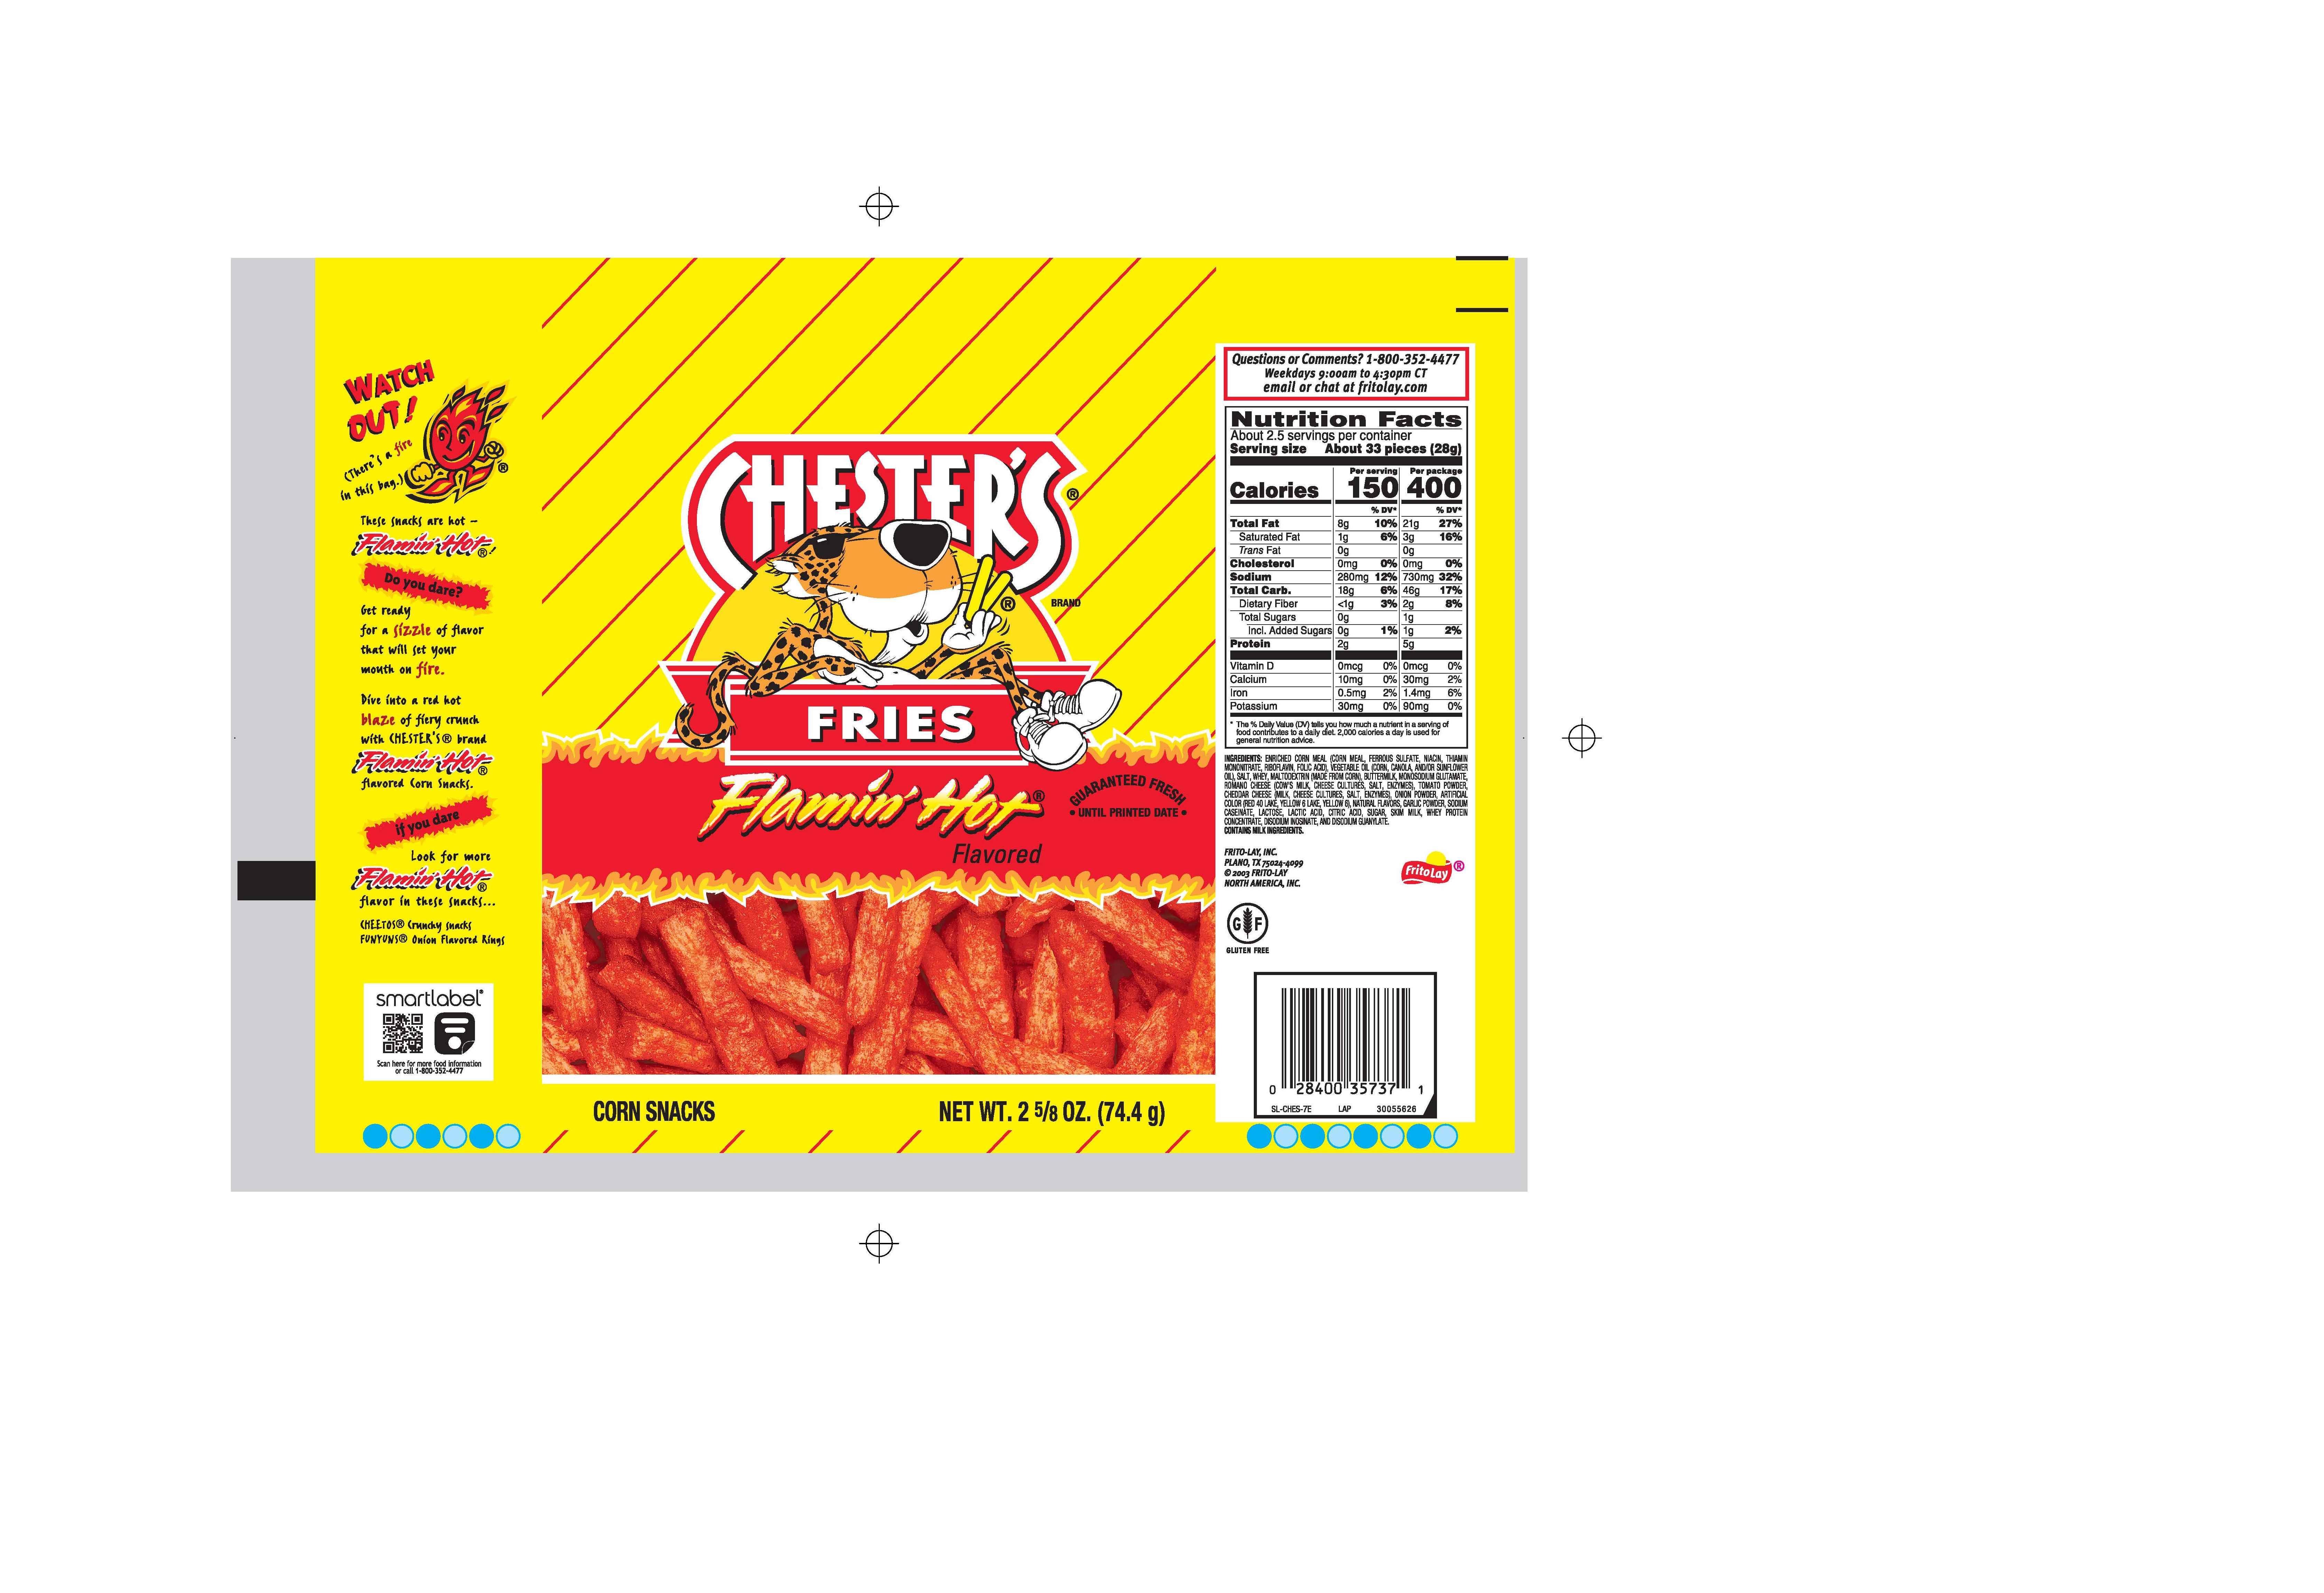 Chesters Fries, Flamin' Hot Flavored - 2.63 oz